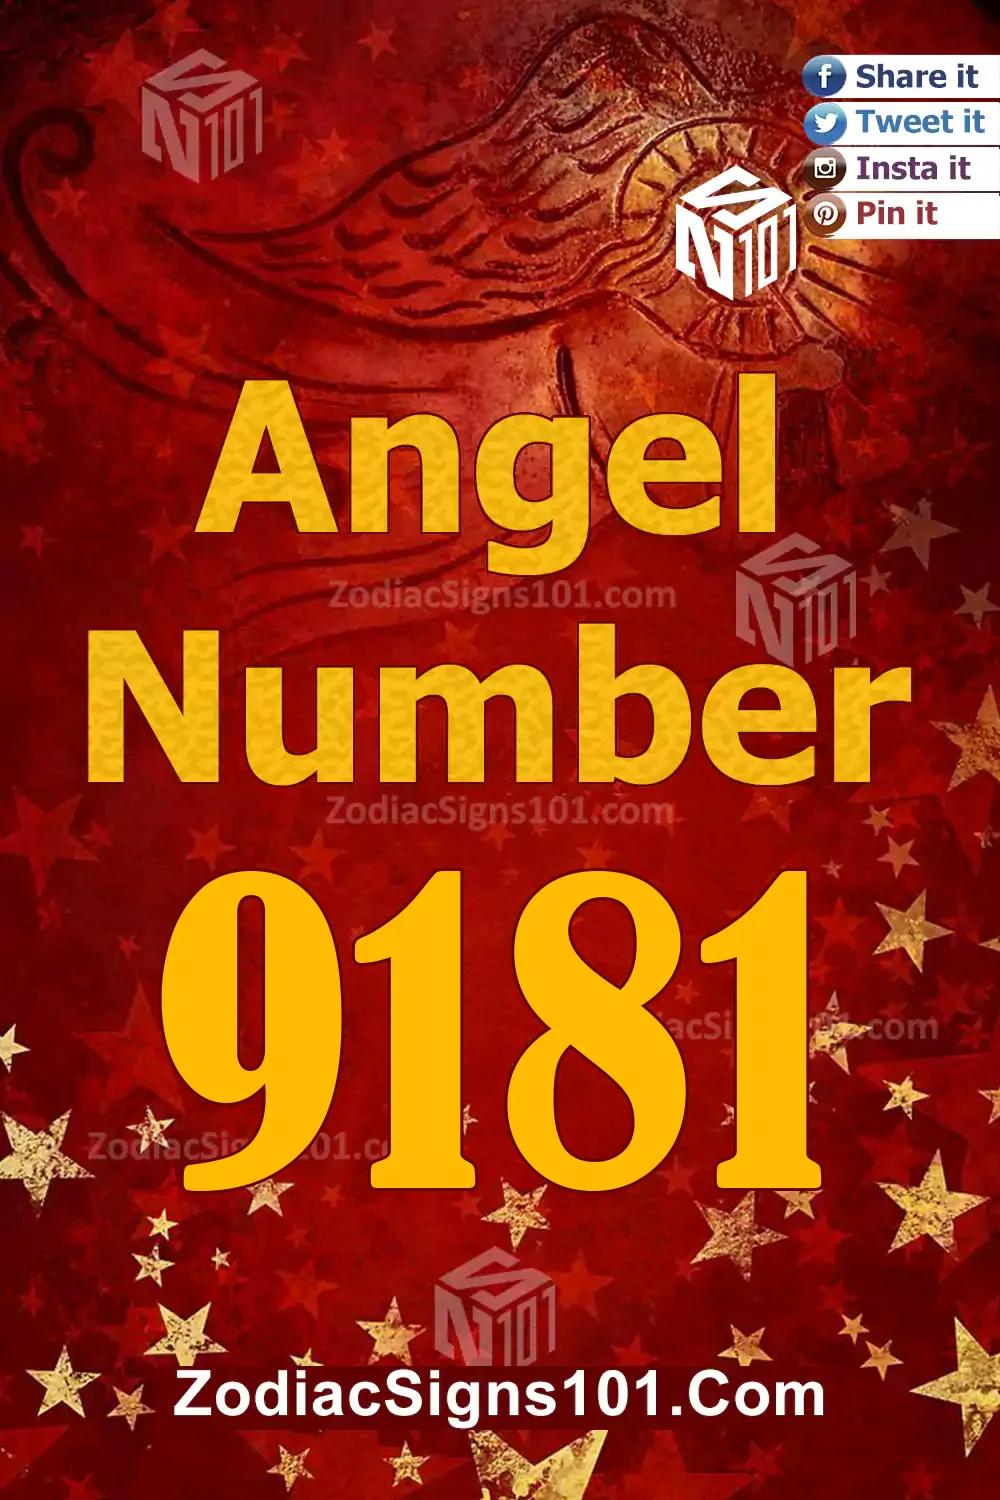 9181 Angel Number Meaning